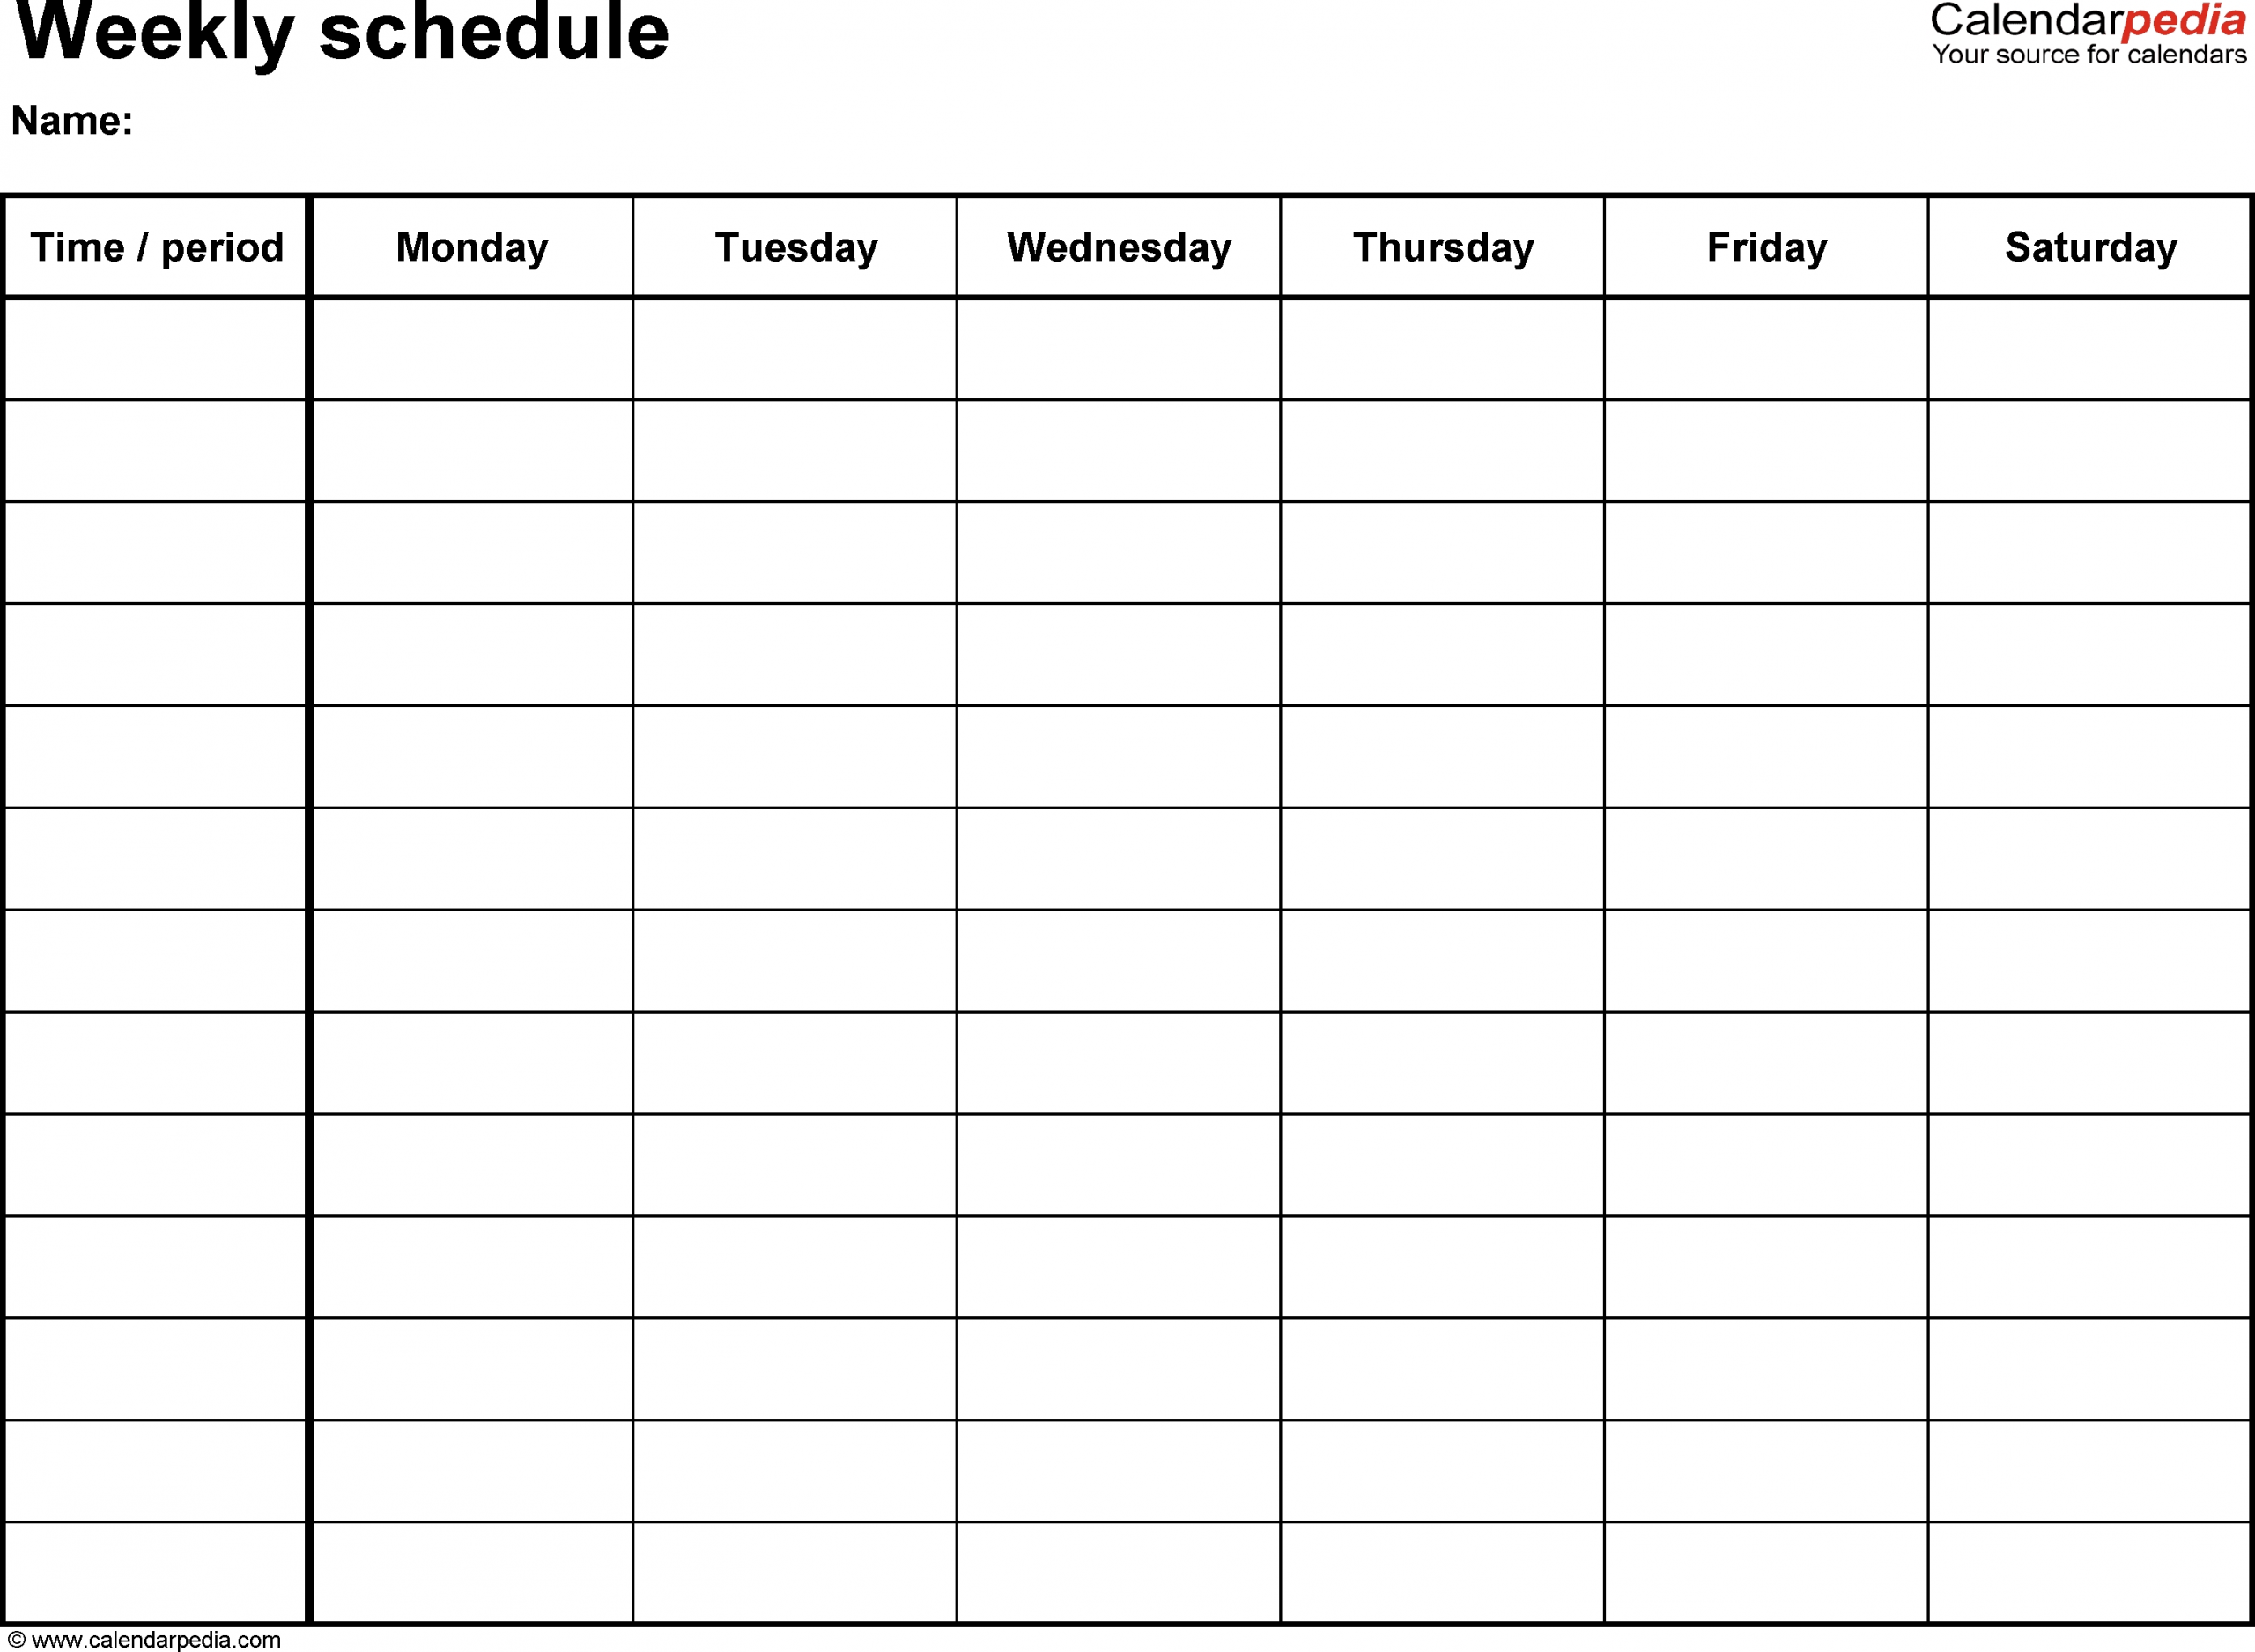 Free Weekly Schedule Templates For Pdf - 18 Templates throughout Free Weekly Calendar Templates Printable